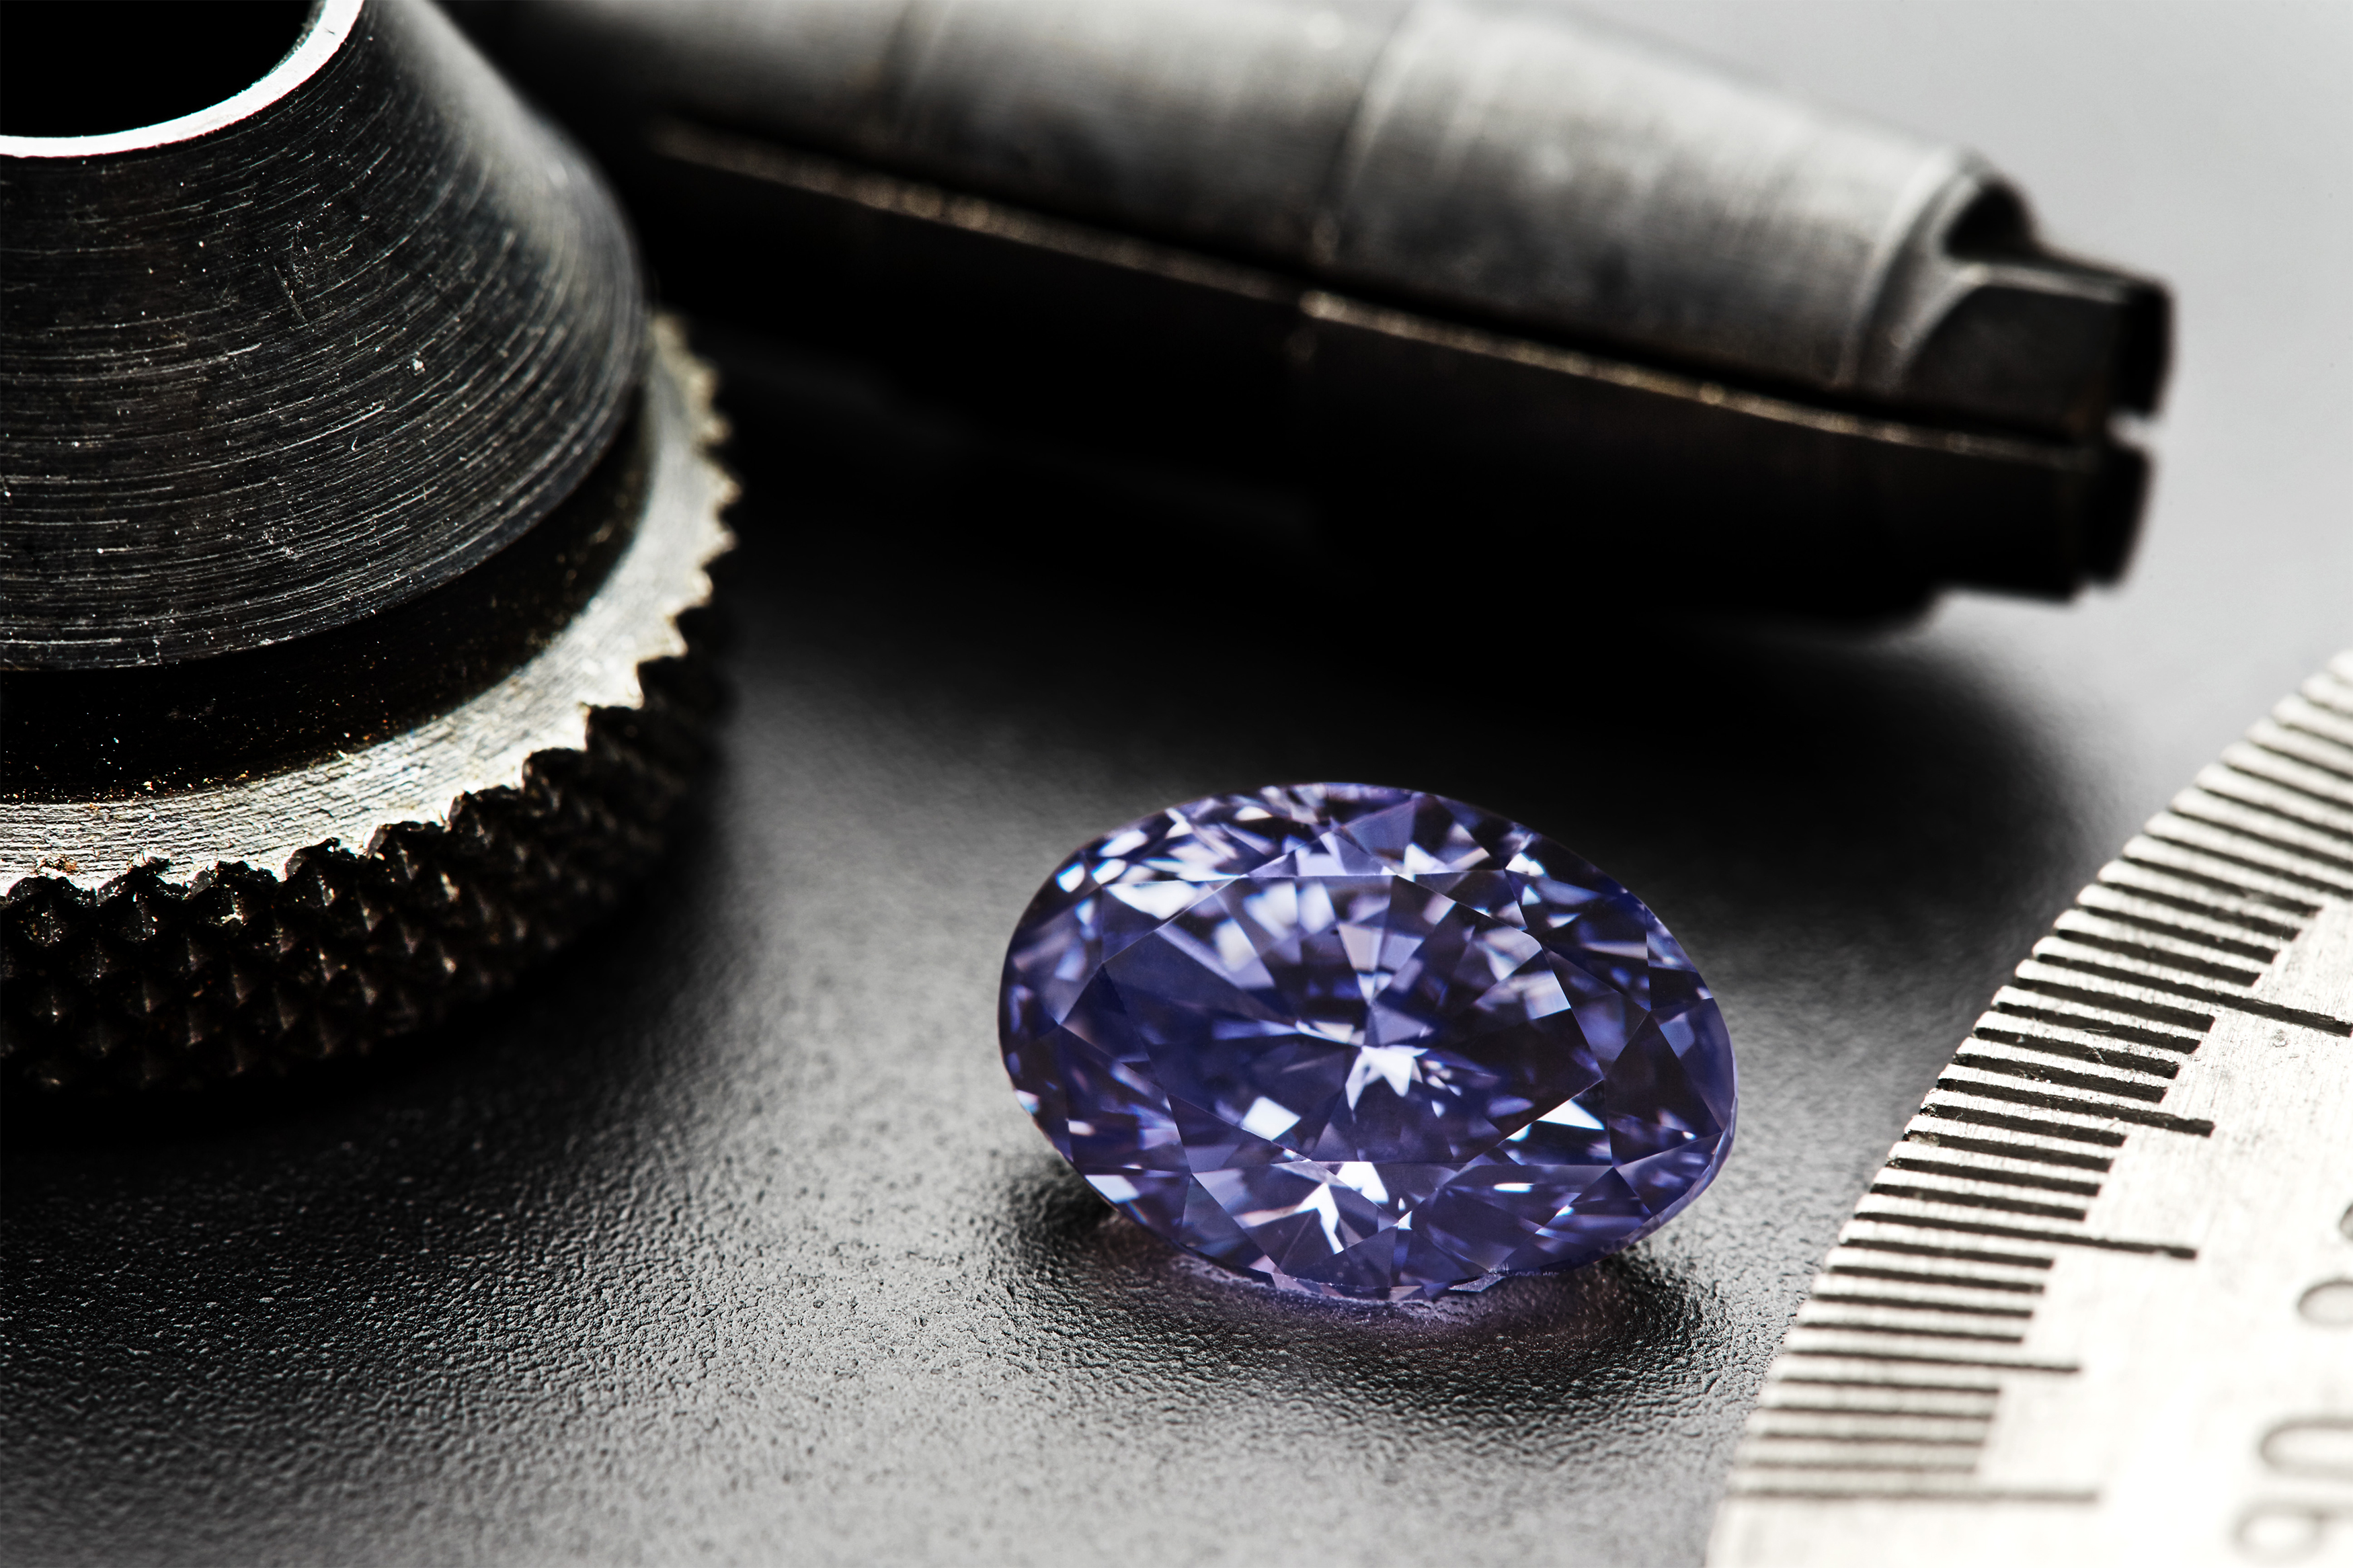 This undated handout picture released on May 3, 2016 by Rio Tinto in Australia shows a rare violet uncut diammond discovered in August 2015 at Australia's remote Argyle mine. The rare violet diamond, the largest of its kind ever found at the Argyle mine, will be the centrepiece of Rio Tinto's annual pink diamonds showcase, the company said on May 3, 2016. / AFP PHOTO / RIO TINTO / STR / ----EDITORS NOTE ---- RESTRICTED TO EDITORIAL USE MANDATORY CREDIT " AFP PHOTO / RIO TINTO" - NO MARKETING - NO ADVERTISING CAMPAIGNS - DISTRIBUTED AS A SERVICE TO CLIENTS - NO ARCHIVES